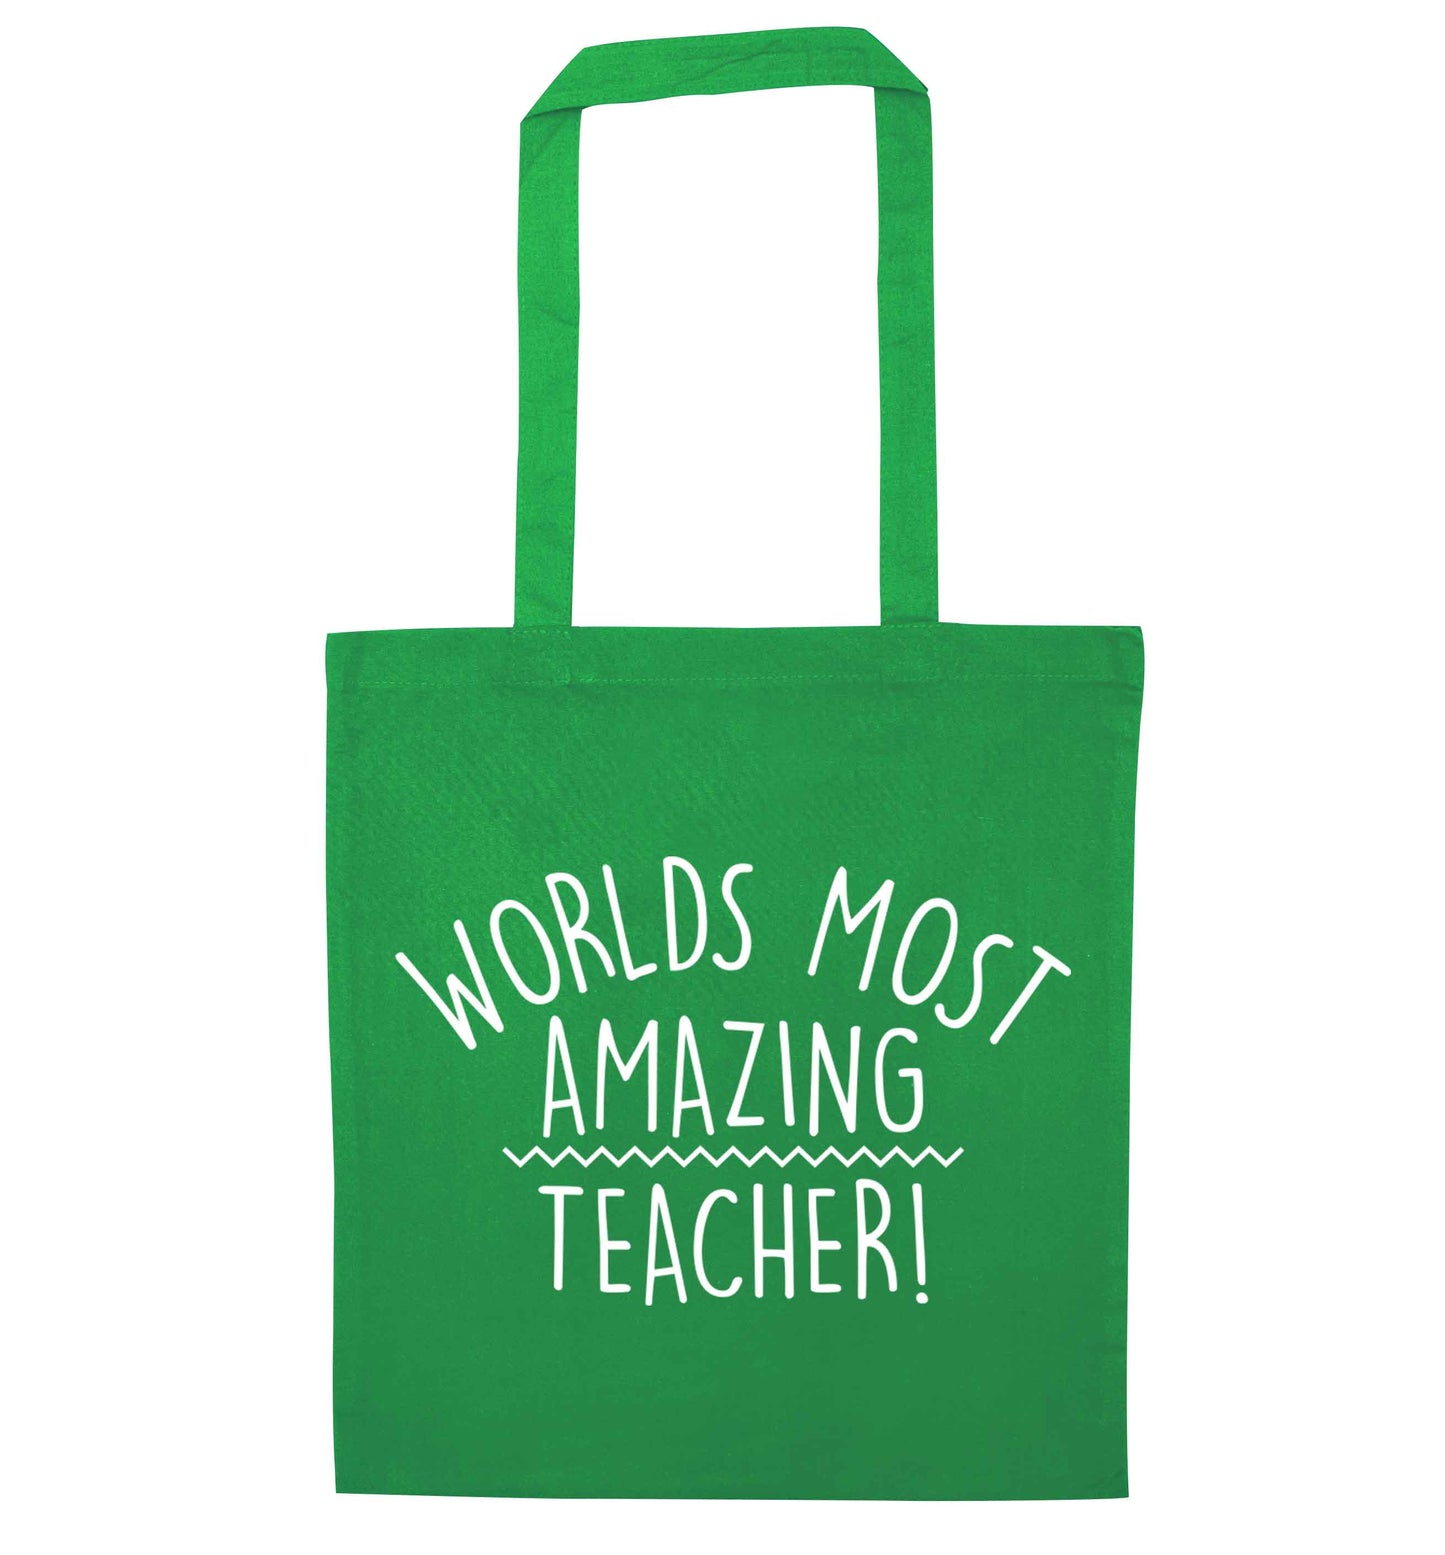 Worlds most amazing teacher green tote bag